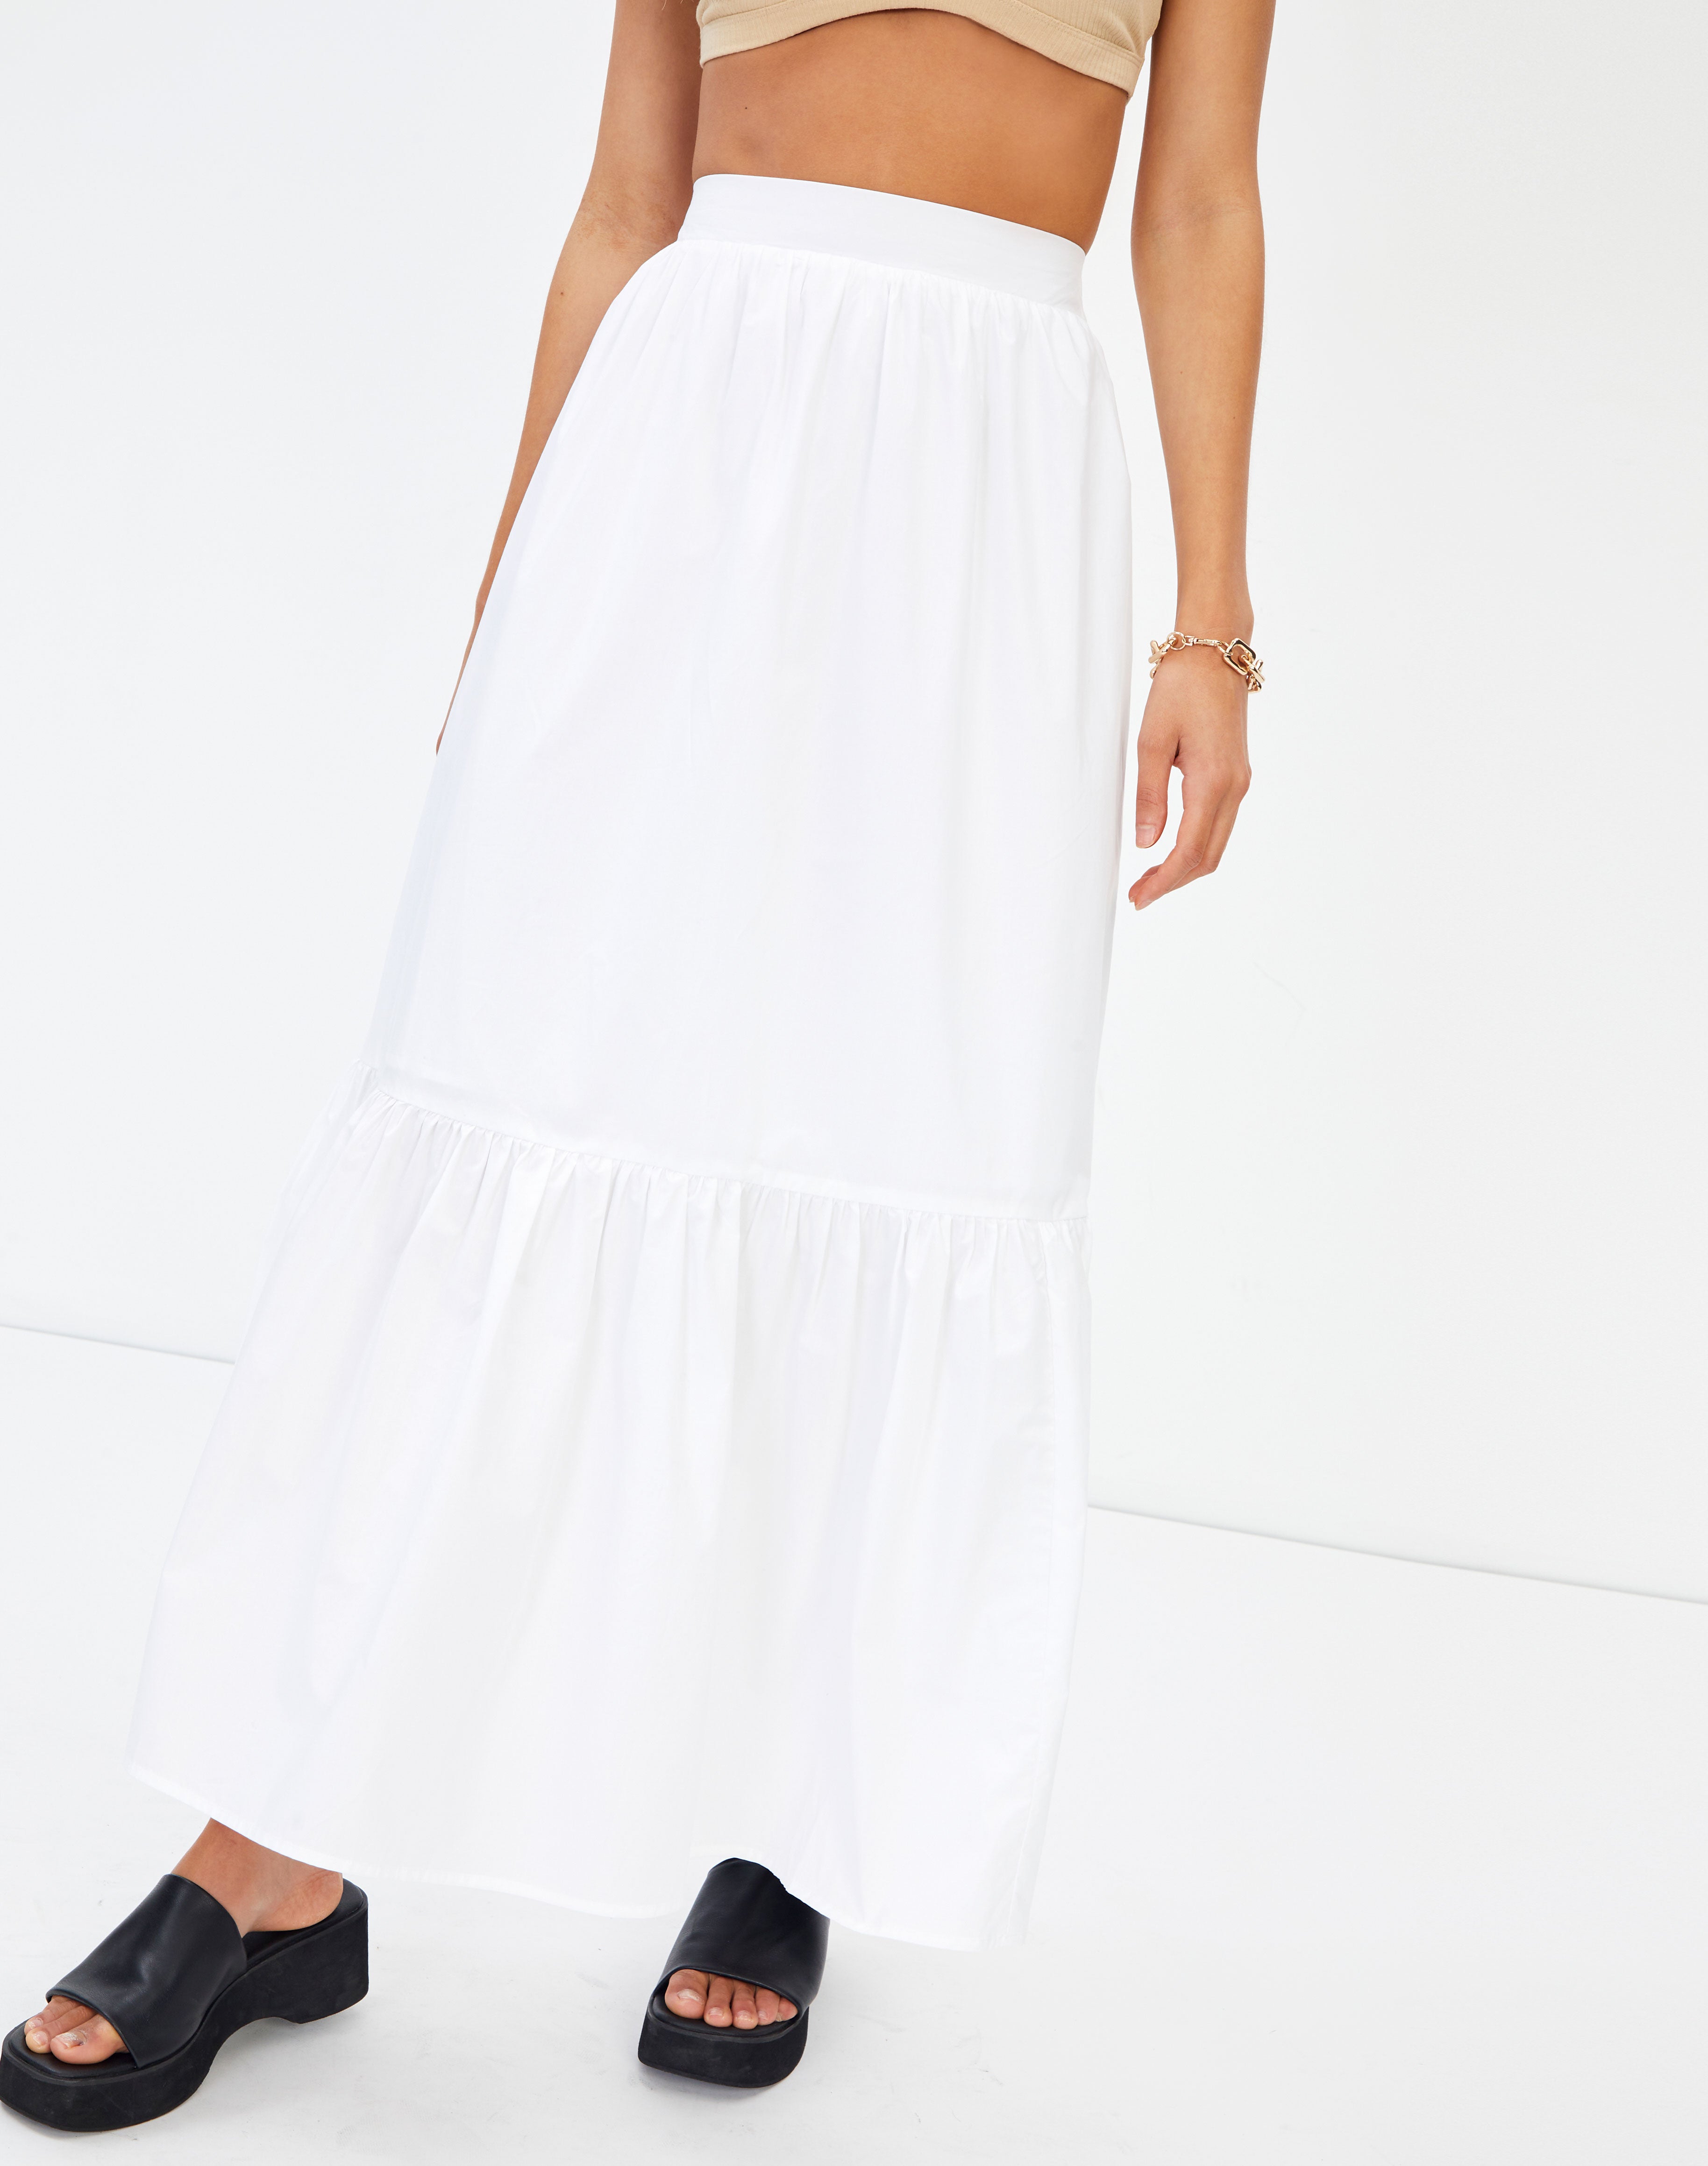 Tiered Maxi Skirt in White | Glassons